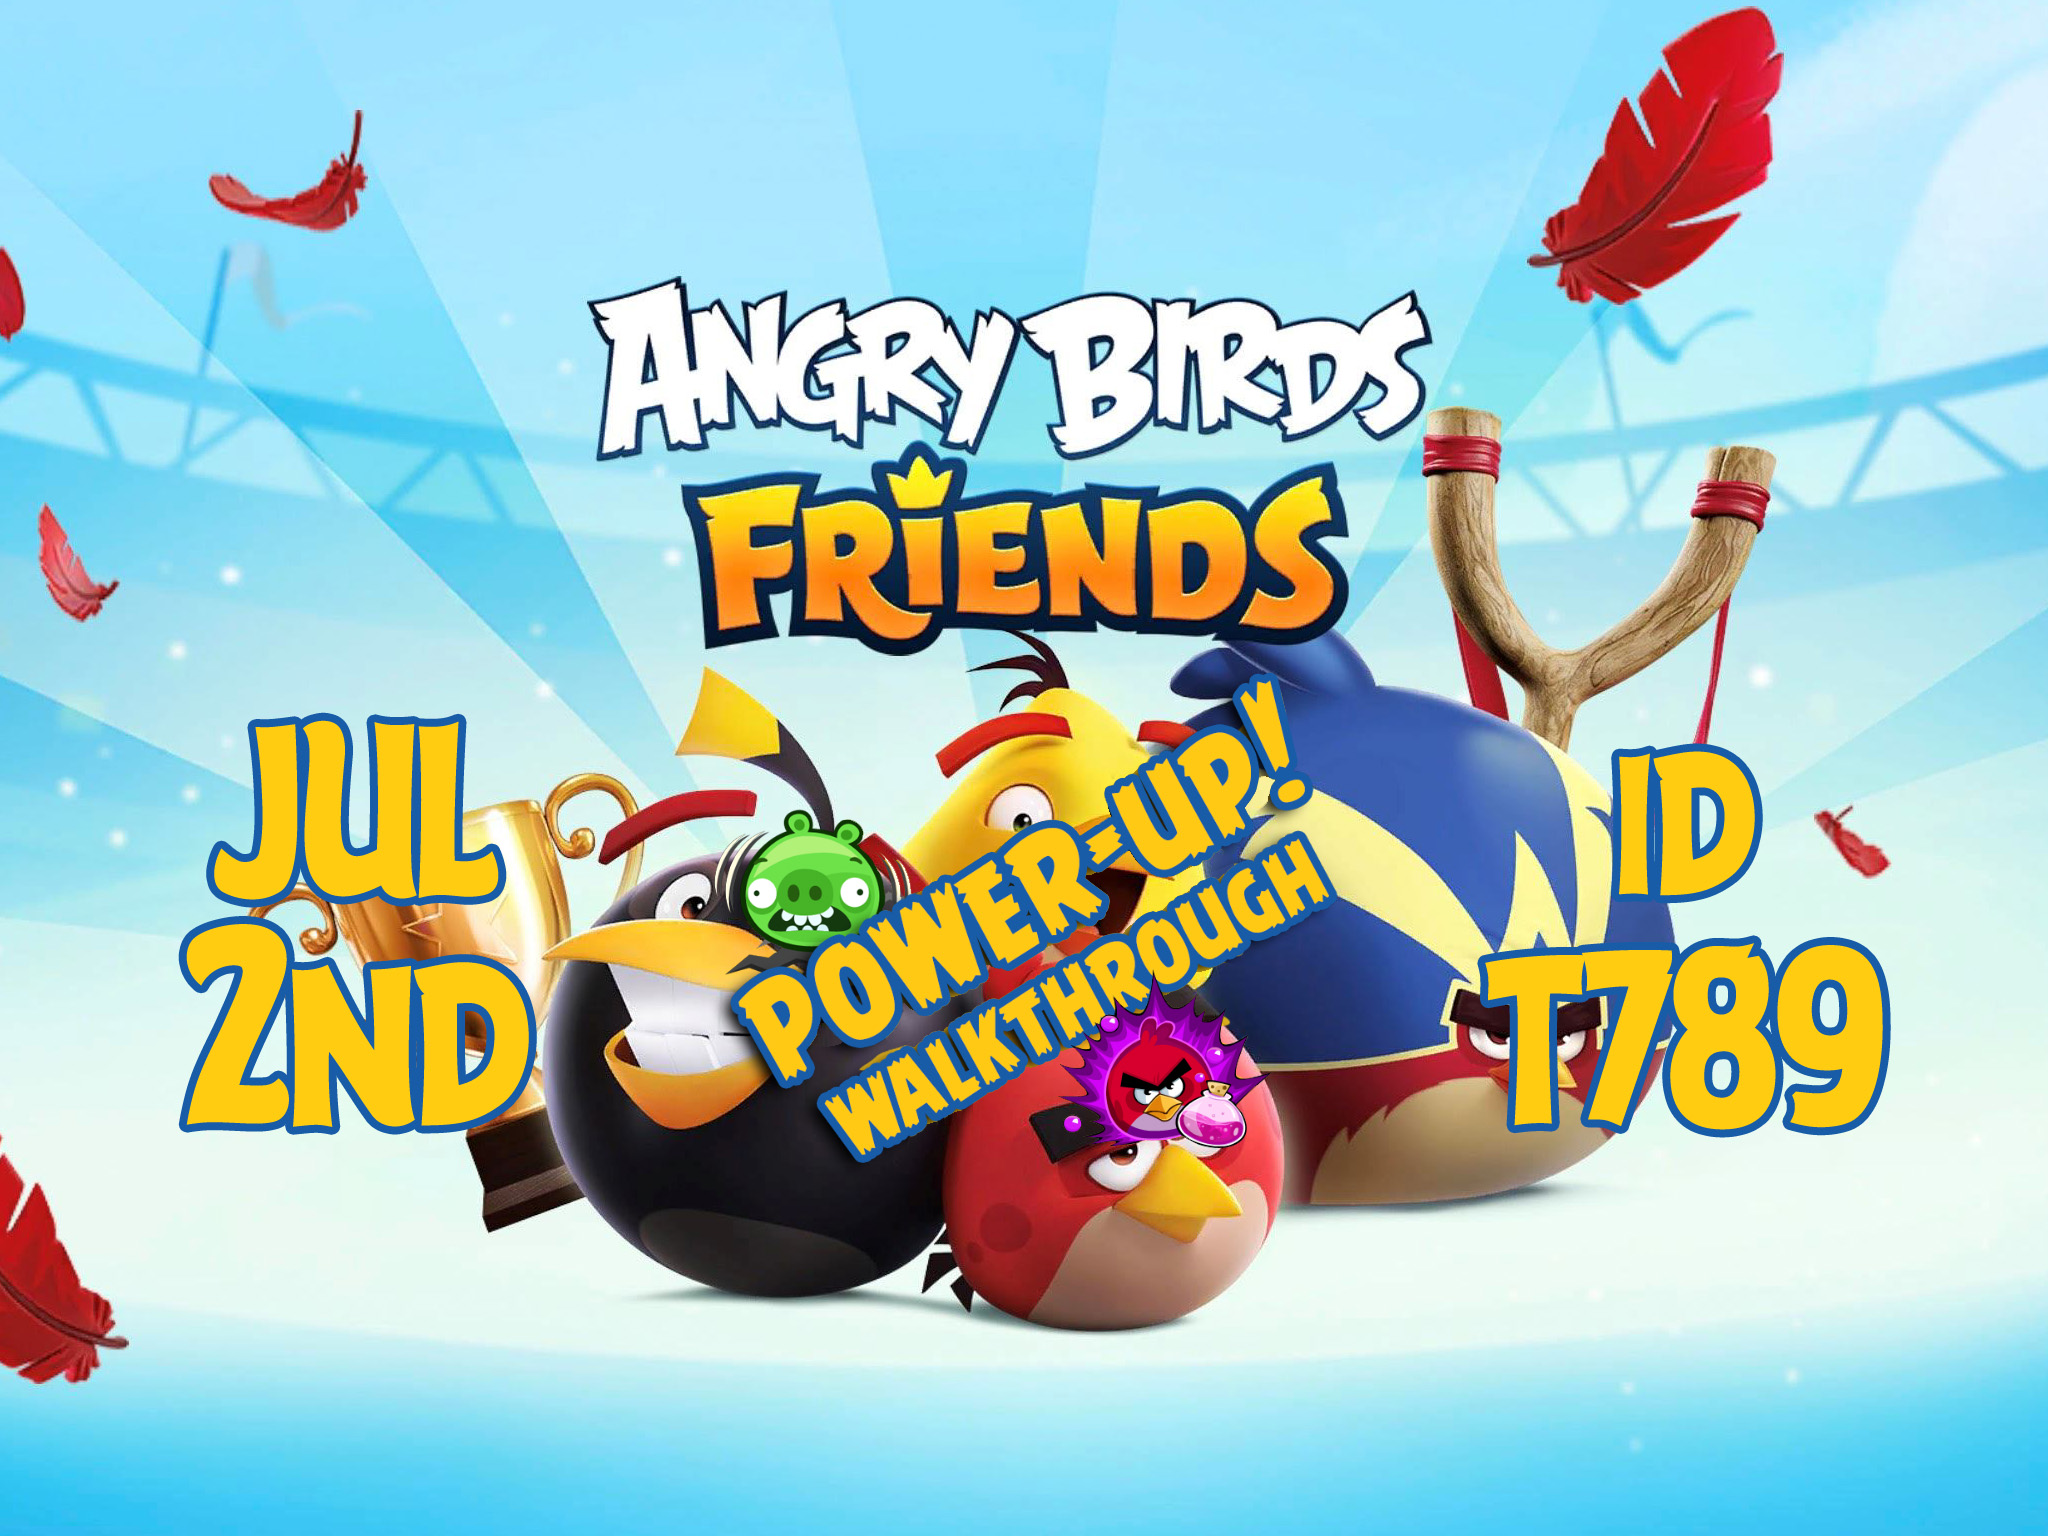 Angry-Birds-Friends-Tournament-T789-Feature-Image-PU